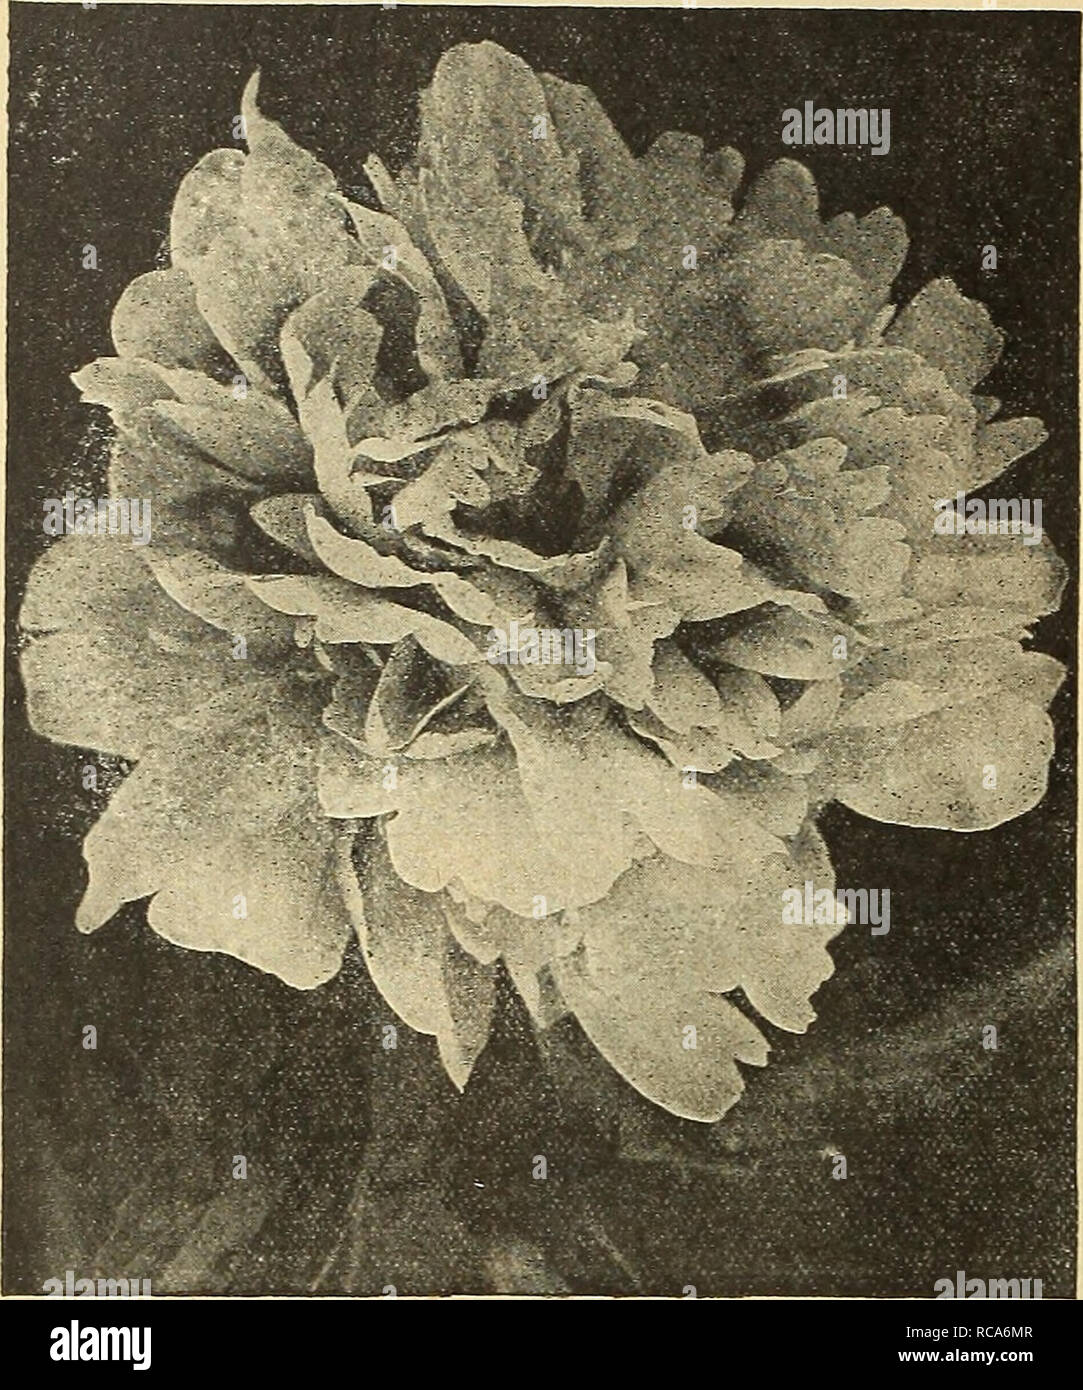 . Dreer's autumn catalogue 1916. Bulbs (Plants) Catalogs; Flowers Seeds Catalogs; Gardening Equipment and supplies Catalogs; Nurseries (Horticulture) Catalogs; Vegetables Seeds Catalogs. 11IN^DITO^HIIADftPH|A^^BUbBS'FW}^LLWrrtNG-i DREER'S FRAGRANT PAEONIES. Double Herbaceous Psony Couronne d'Or. Immense hall-shaDed blooms, snow white with golden yellow stamens and delicate carmine markings on the central petals. Edulis Superba. Deep rose-pink with lighter shadings. The earliest variety in our collection. 35 cts. each; $3.50 per doz. Felix Crousse. The ideal self-colored bright red Pseony. Fran Stock Photo